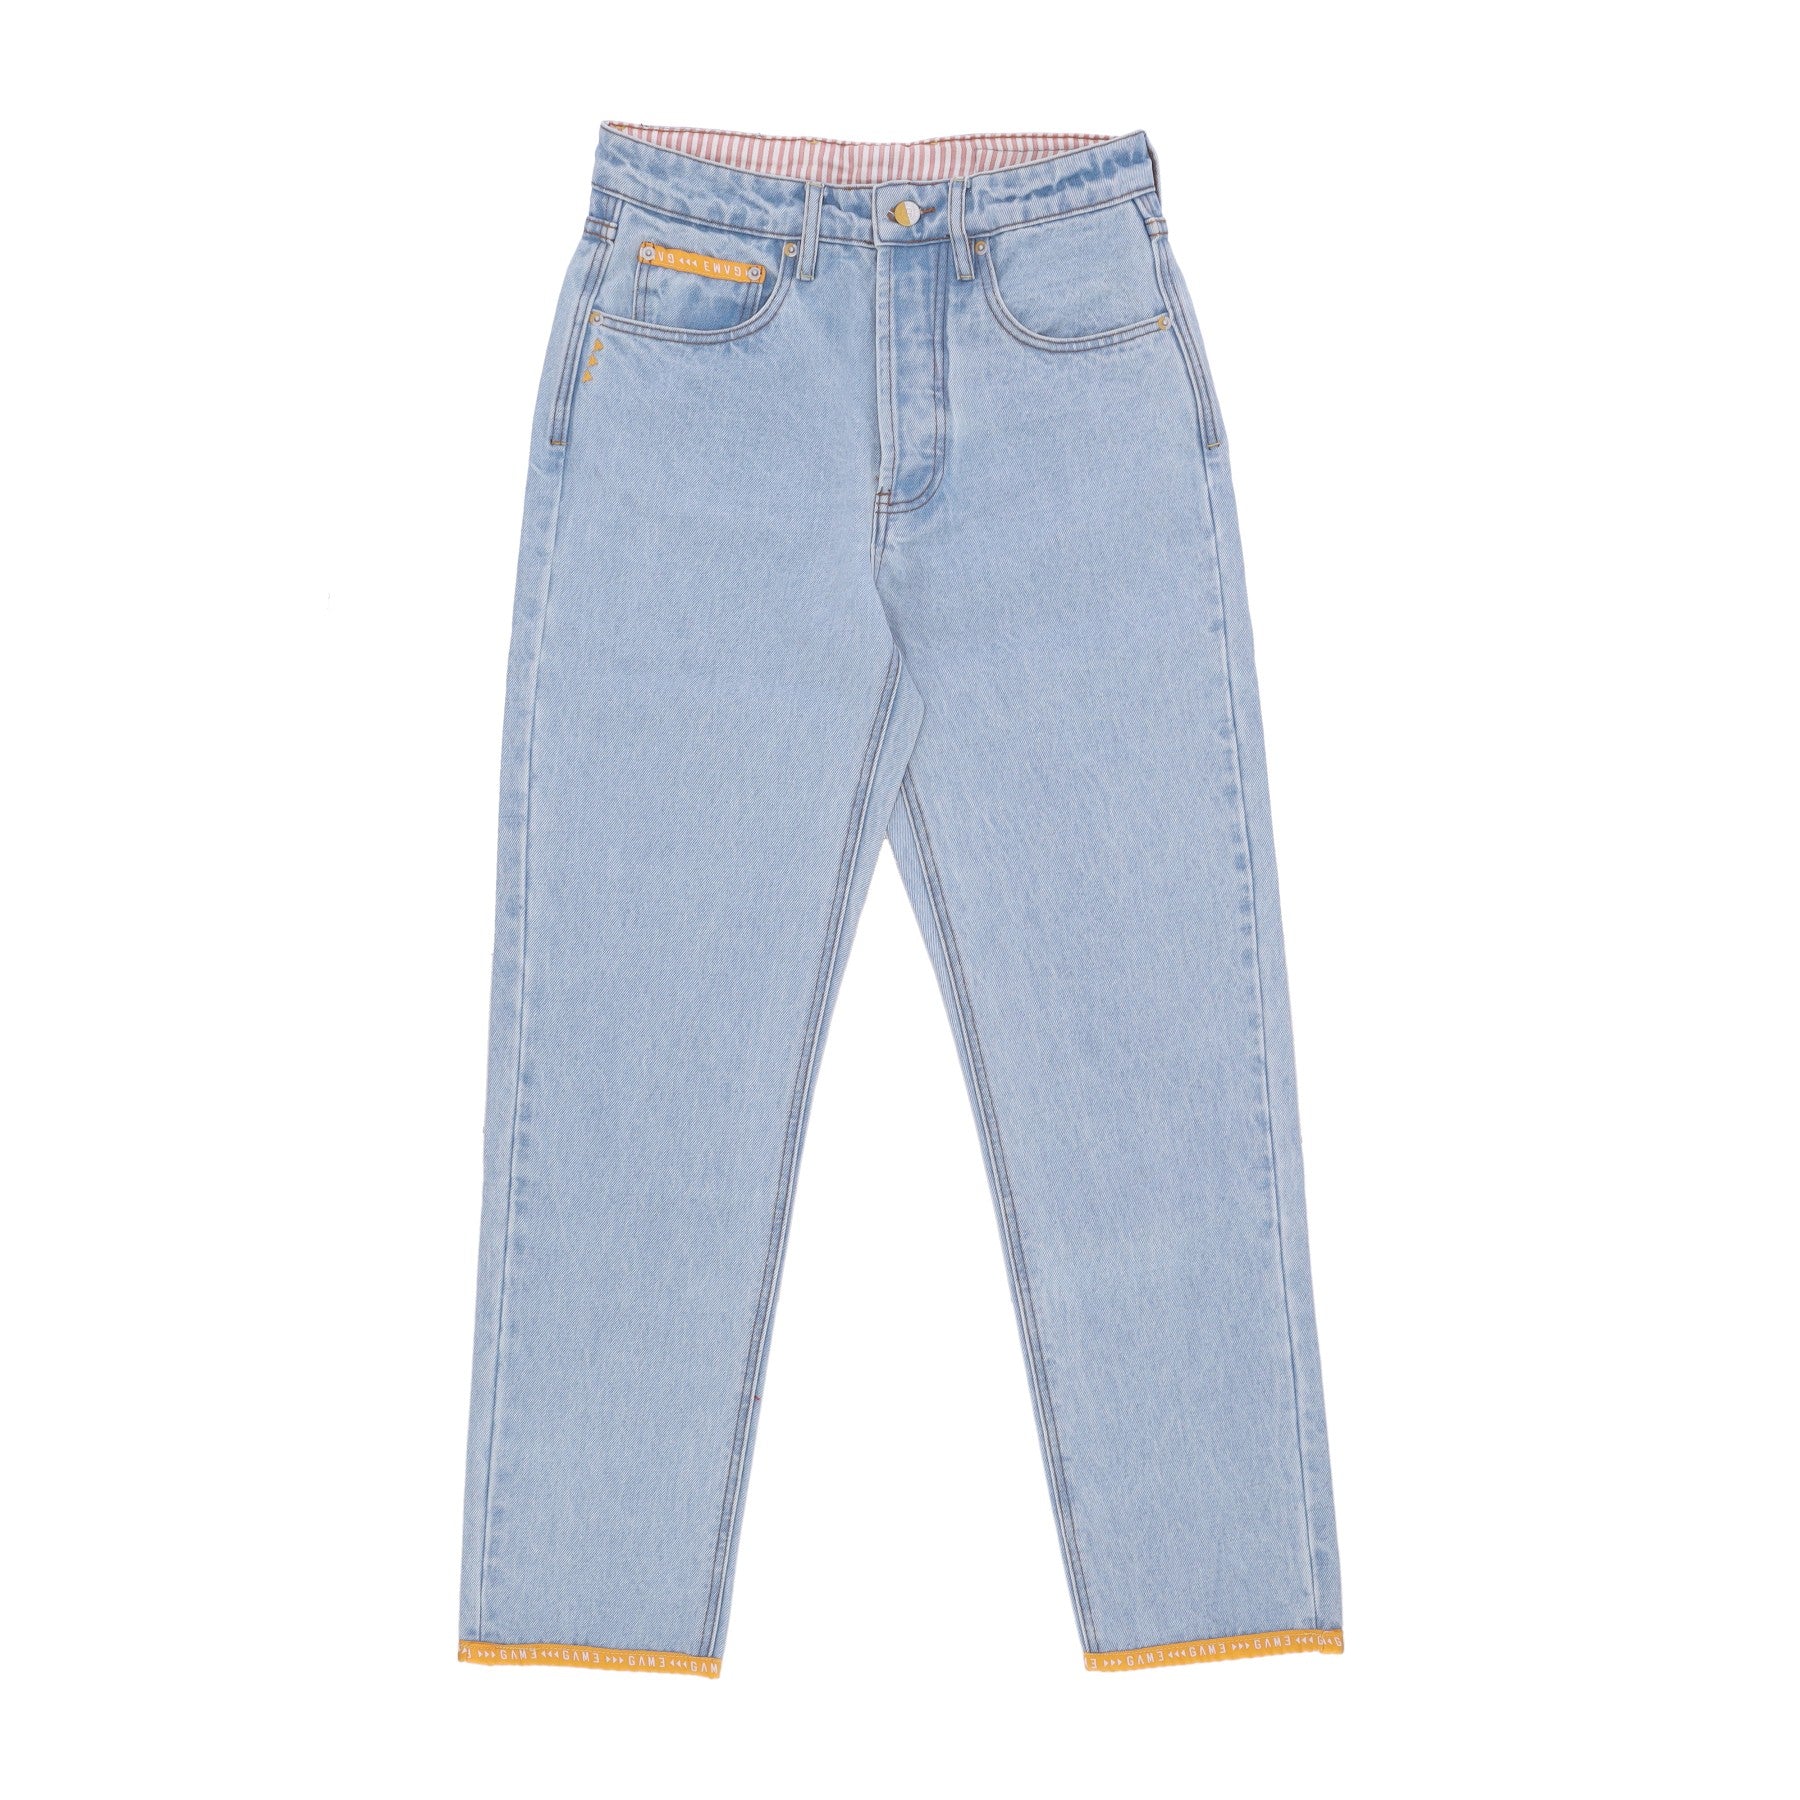 Game, Jeans Uomo The Lost Tapes Five Pocket Bleach Washed Denim, Light Blue